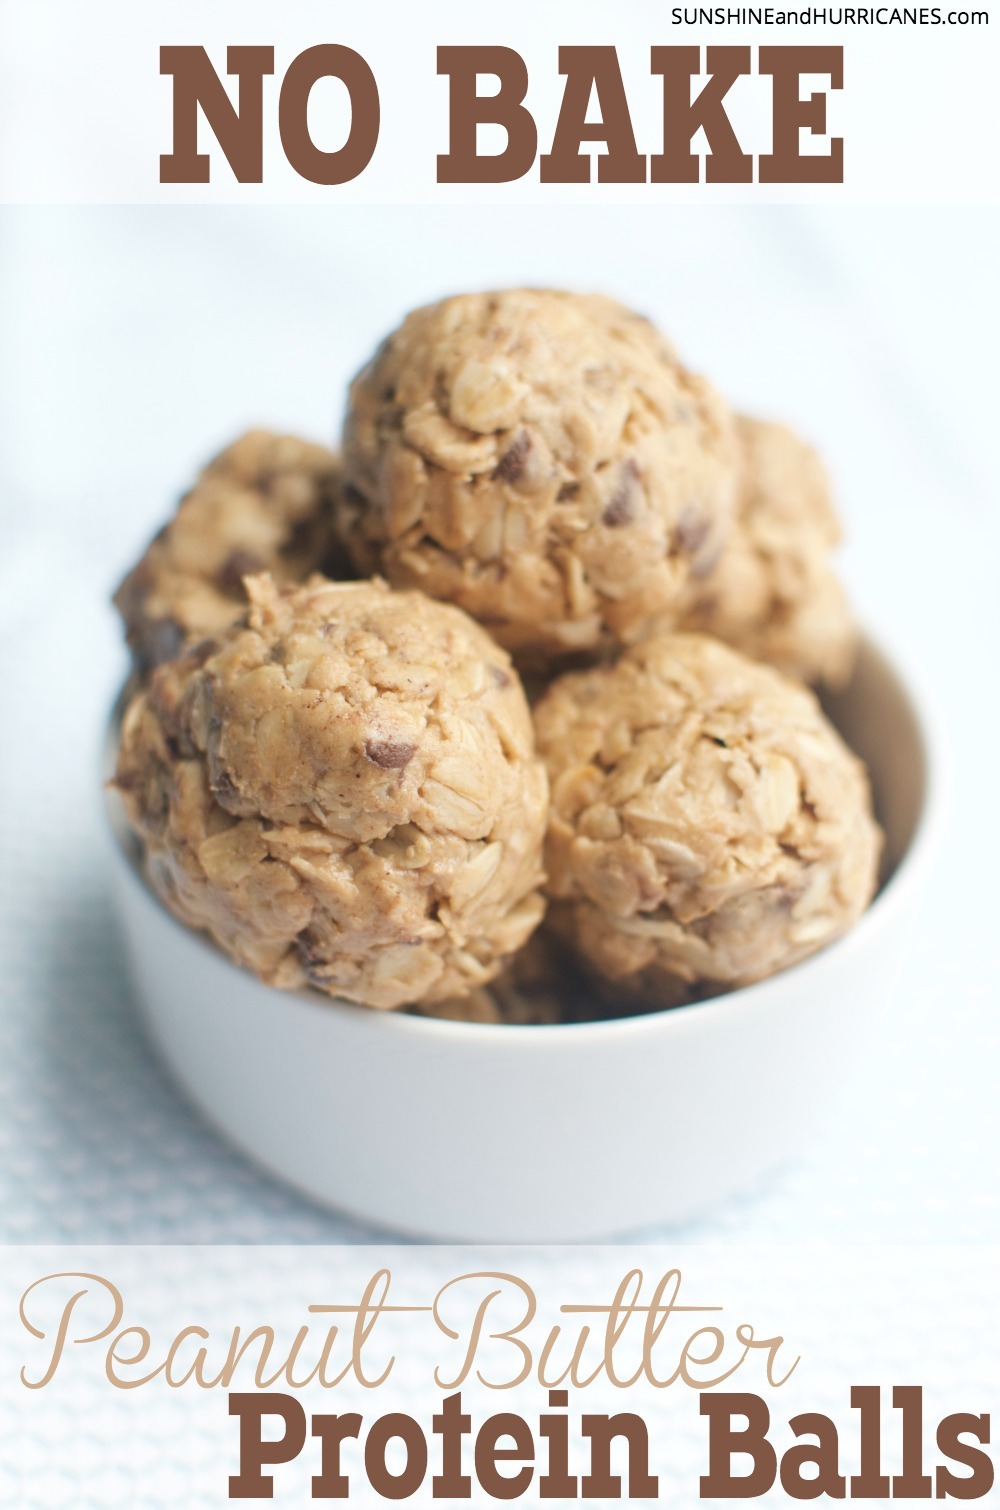 Looking for a healthy and taste snack for your kids that you can pop in their lunches or grab on the go as you head to your many family activities? These NO BAKE Peanut Butter Protein Balls are super fast to make and pack the perfect punch of energy to kid you and your kids going through your jam packed days. Tasty with just the right touch of sweet. SunshineandHurricanes.com